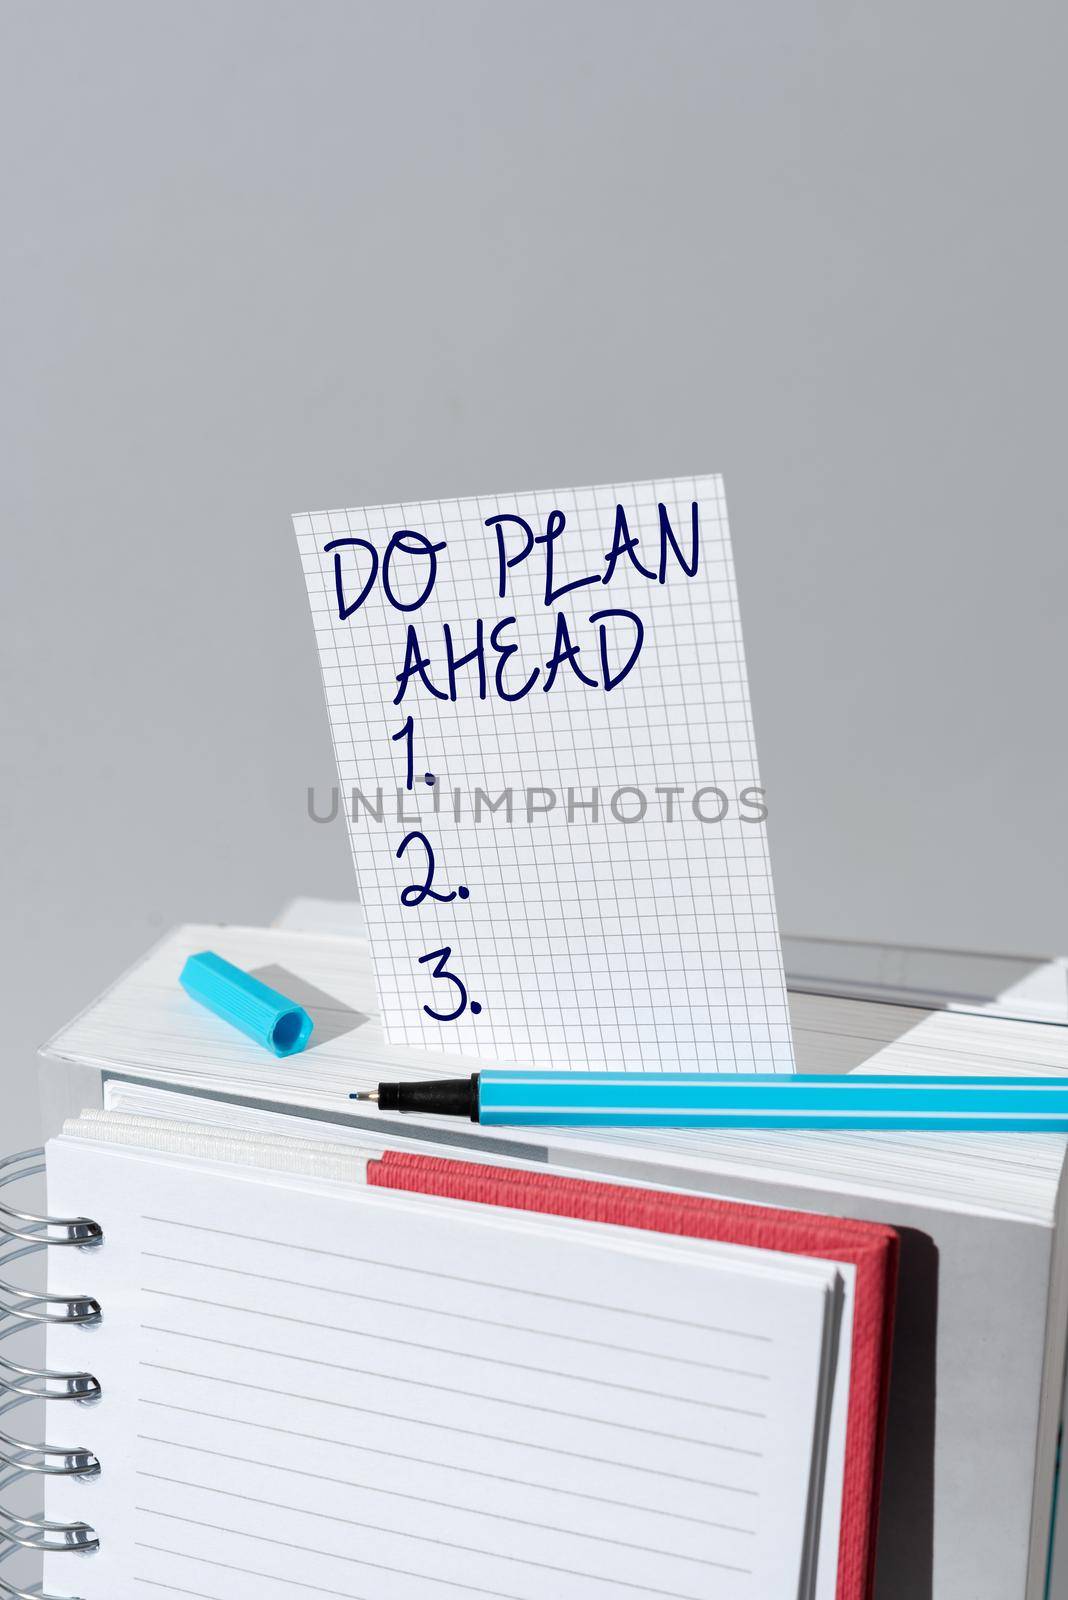 Text caption presenting Do Plan Ahead, Business overview Planning steps for obtaining success planning schedule Frame Decorated With Colorful Flowers And Foliage Arranged Harmoniously.